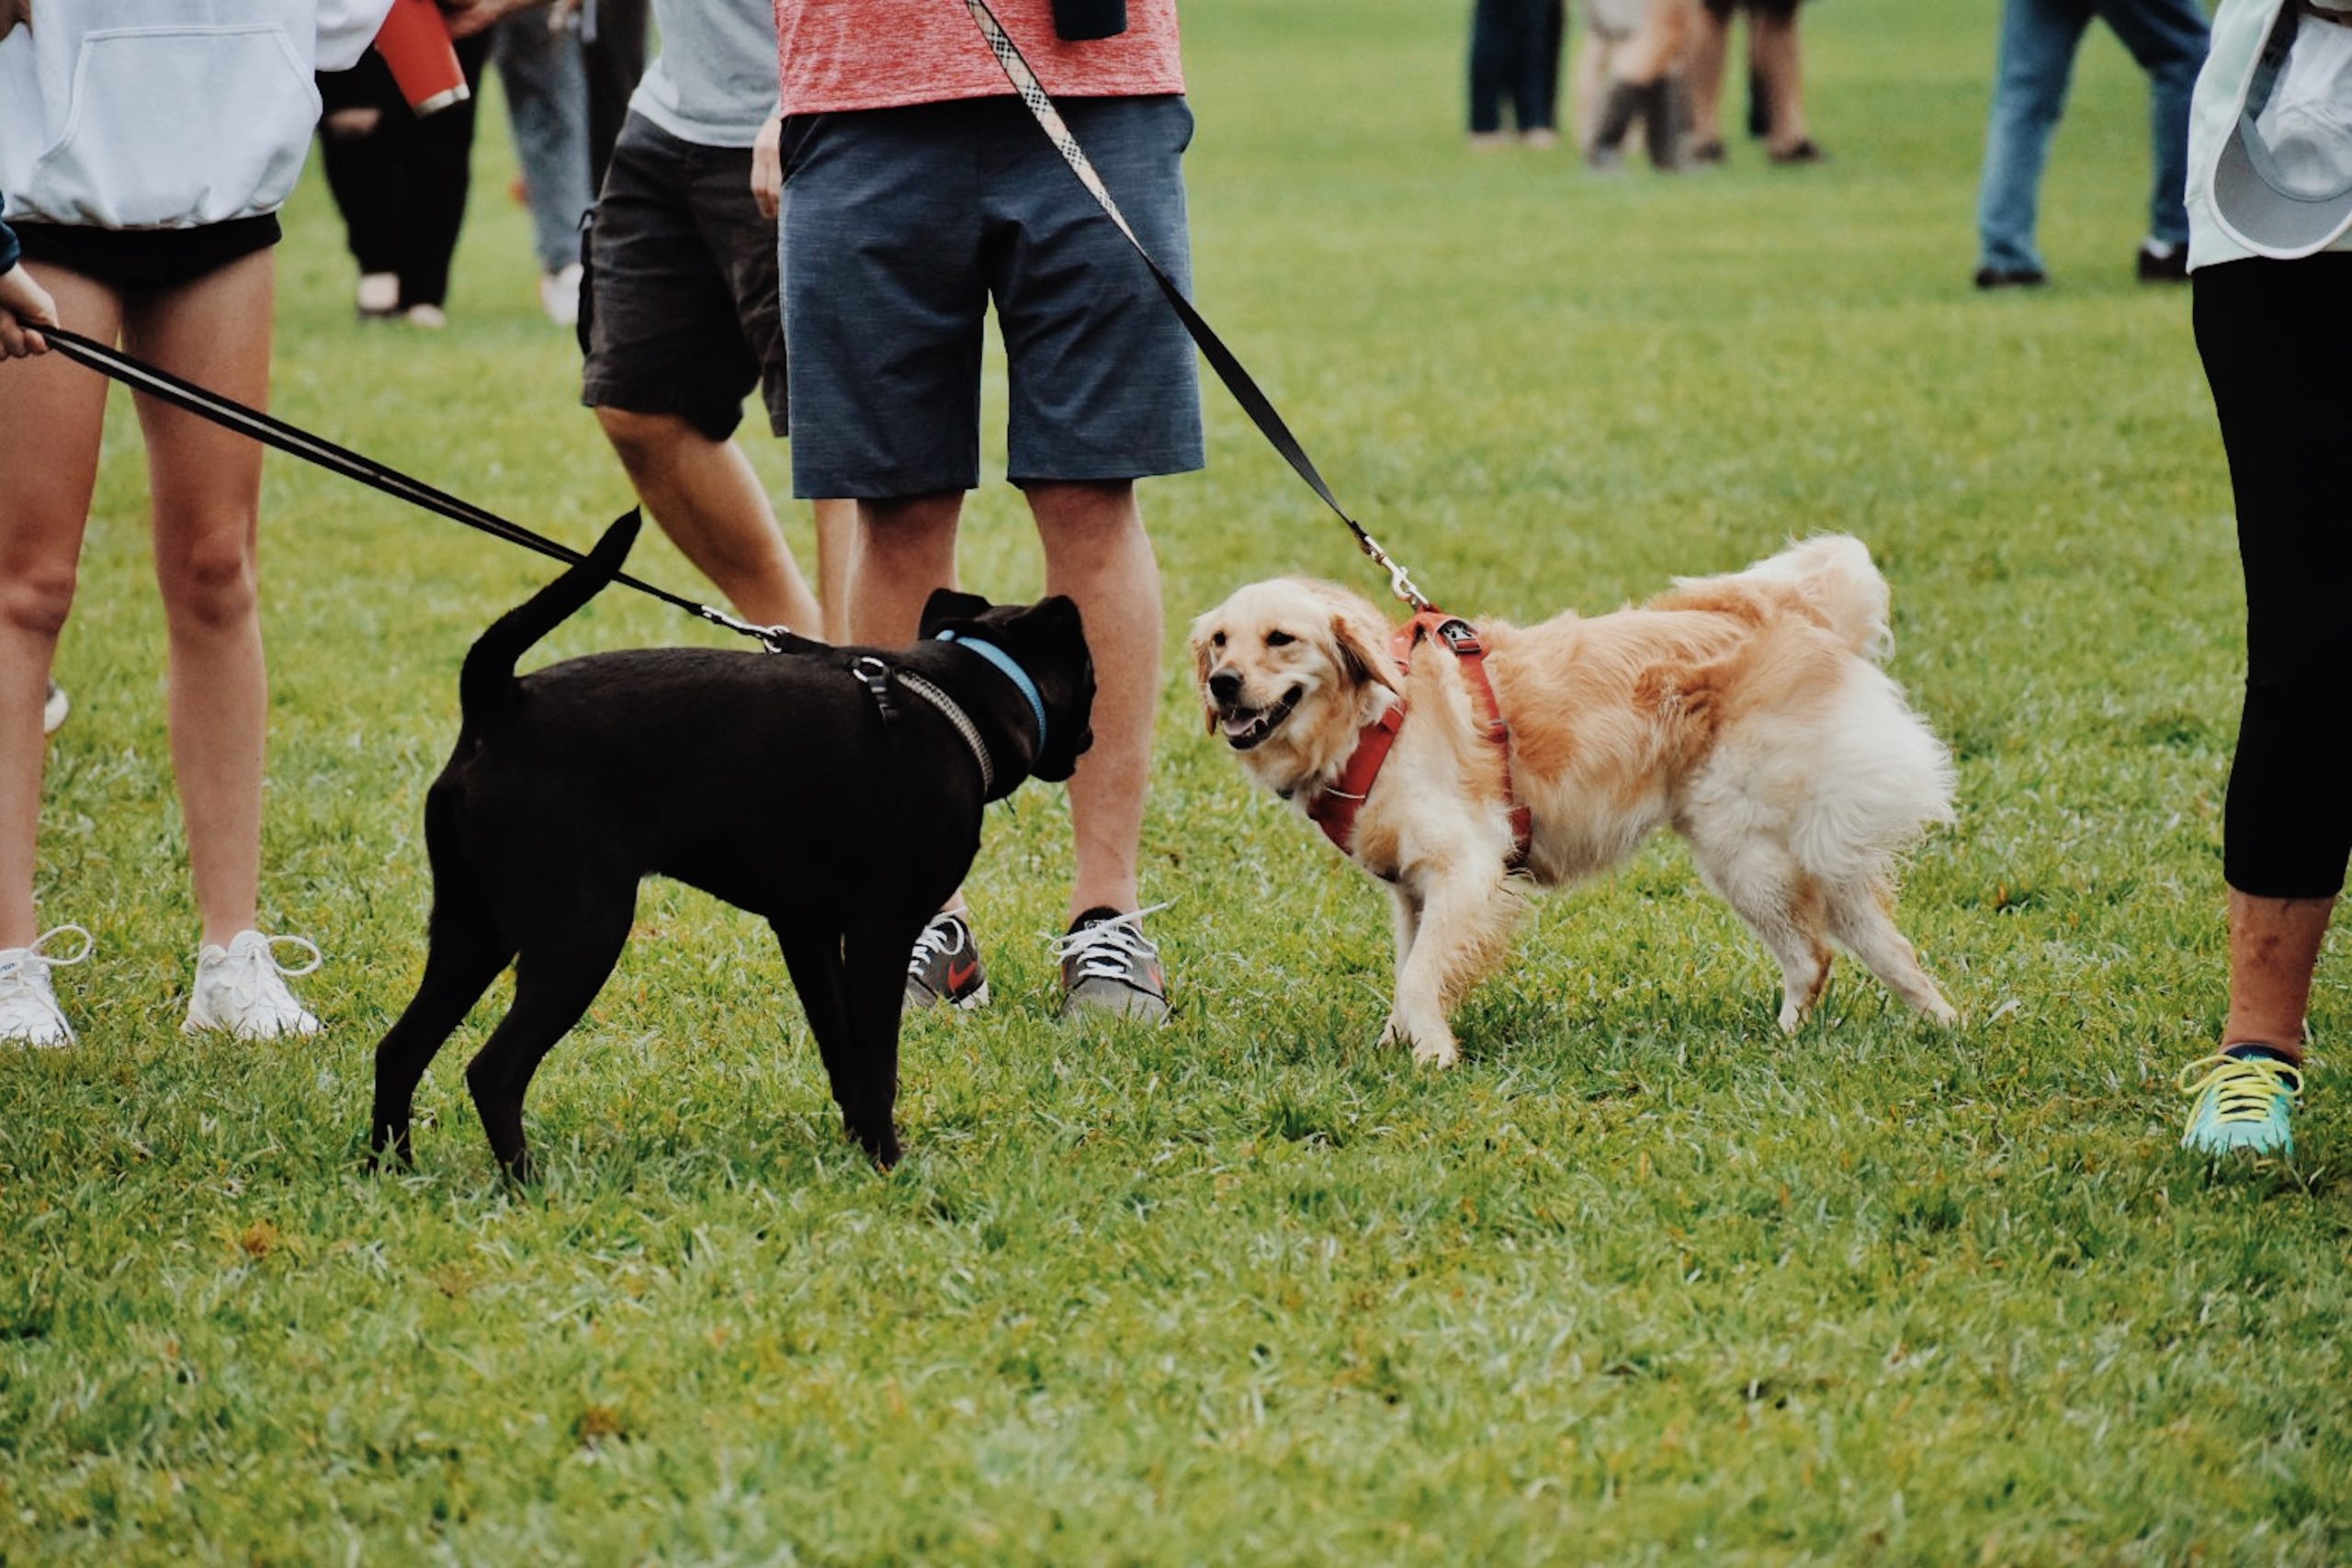 two dogs on leashes interacting with each other at a dog park